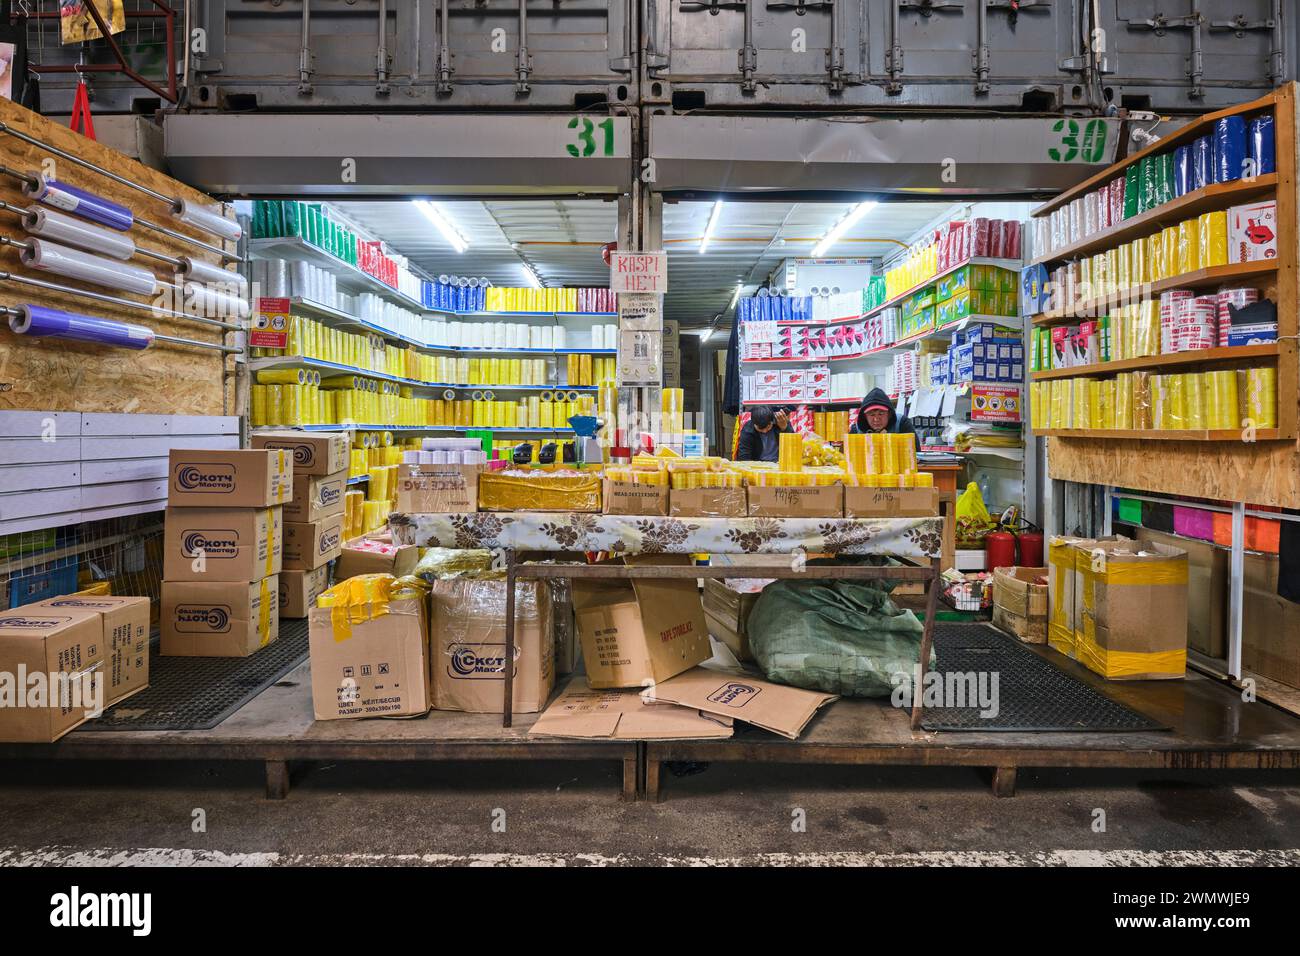 A view of a shop, store that sells many kinds of tape, including clear shipping tape. At the Barakholka shipping container local market in Almaty, Kaz Stock Photo